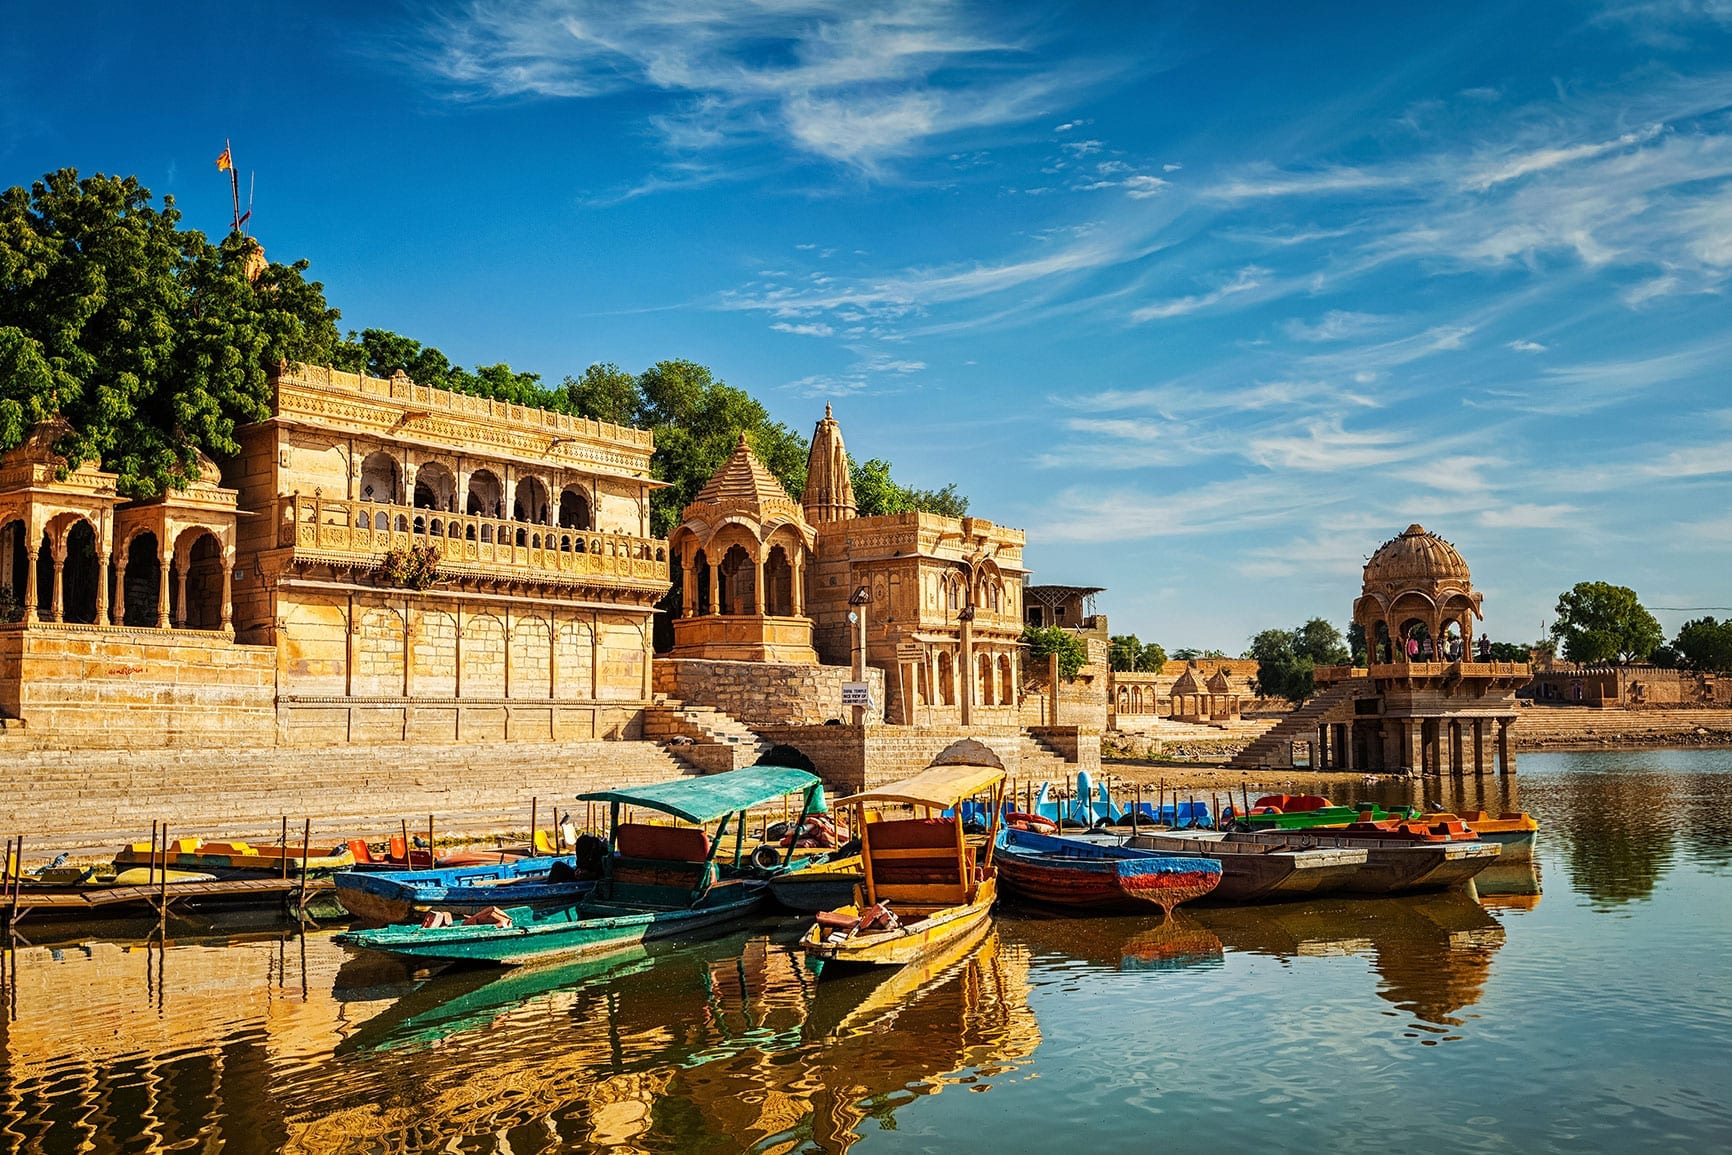 Jaisalmer - one of the best places to travel solo in North India